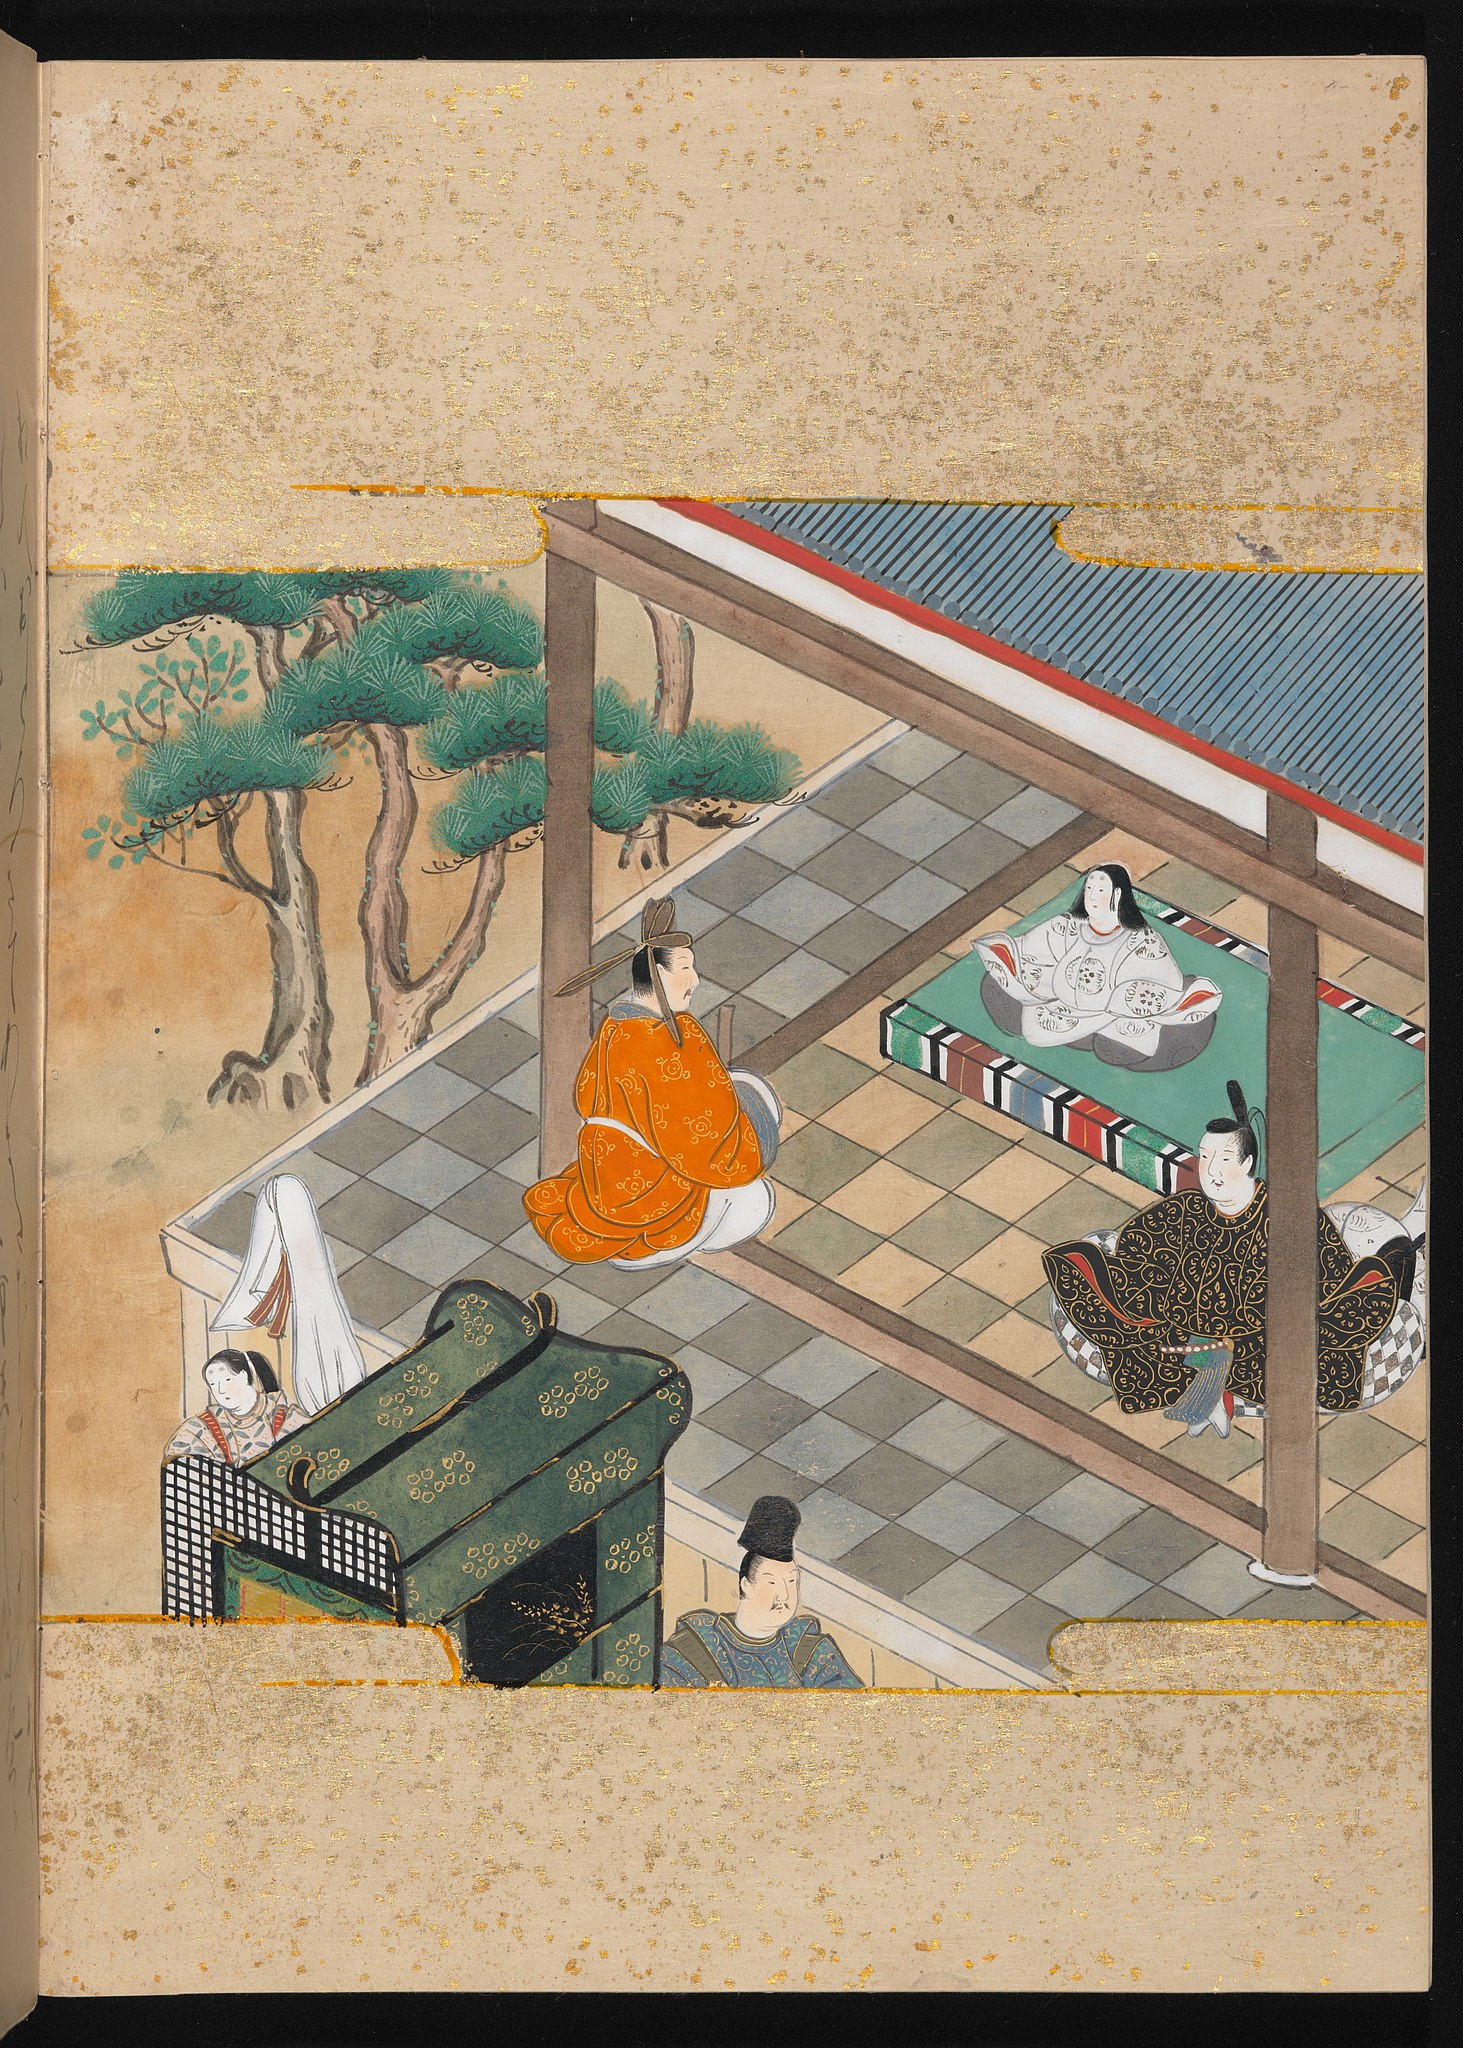 A traditional Japanese painting depicting several figures inside and around a building; one figure in an orange robe sits while others in various clothing styles are positioned in the scene.